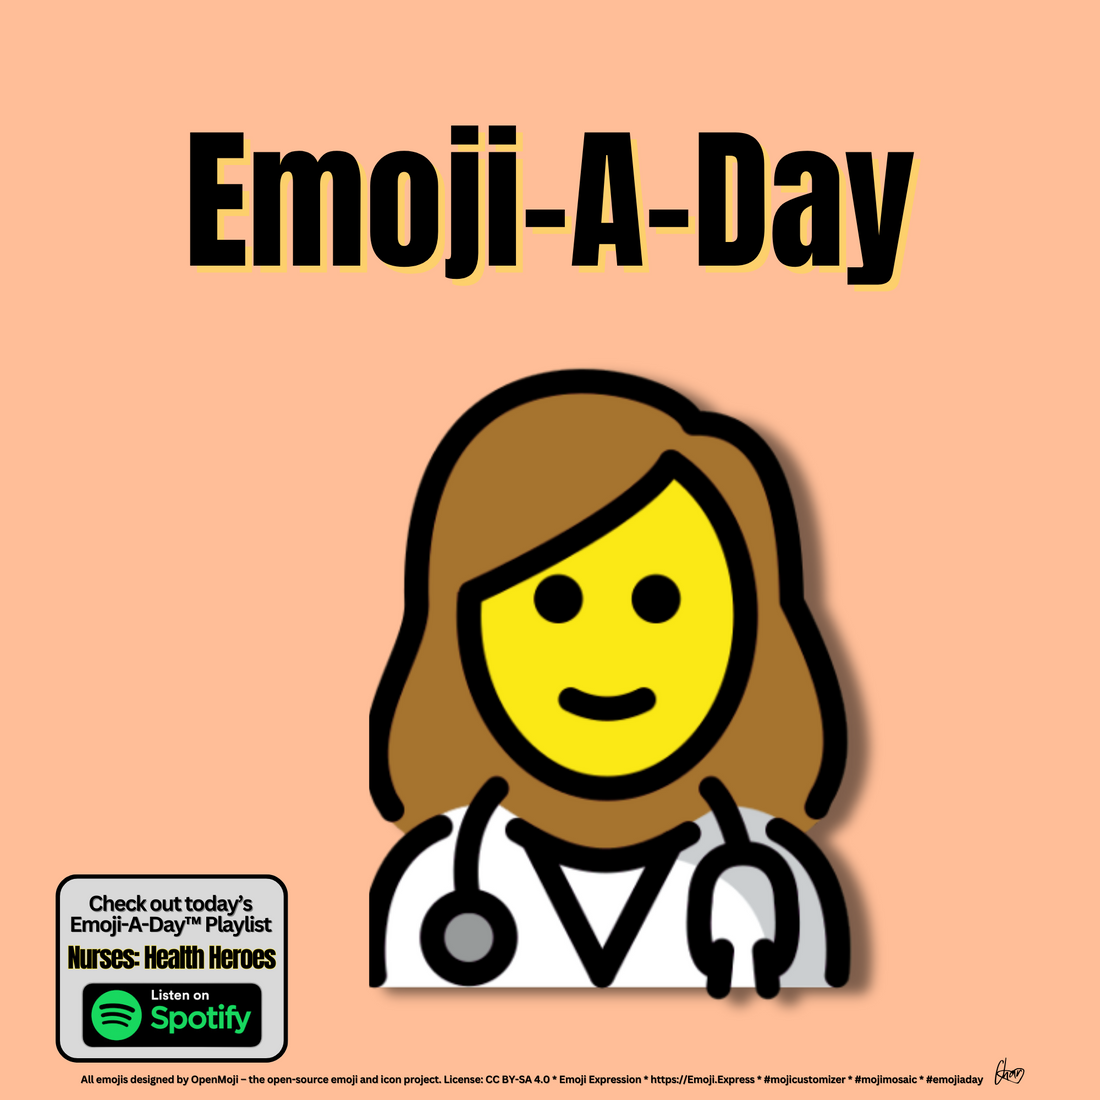 Emoij-A-Day theme with Woman Healthcare Worker emoji and Nurses: Health Heroes Spotify Playlist